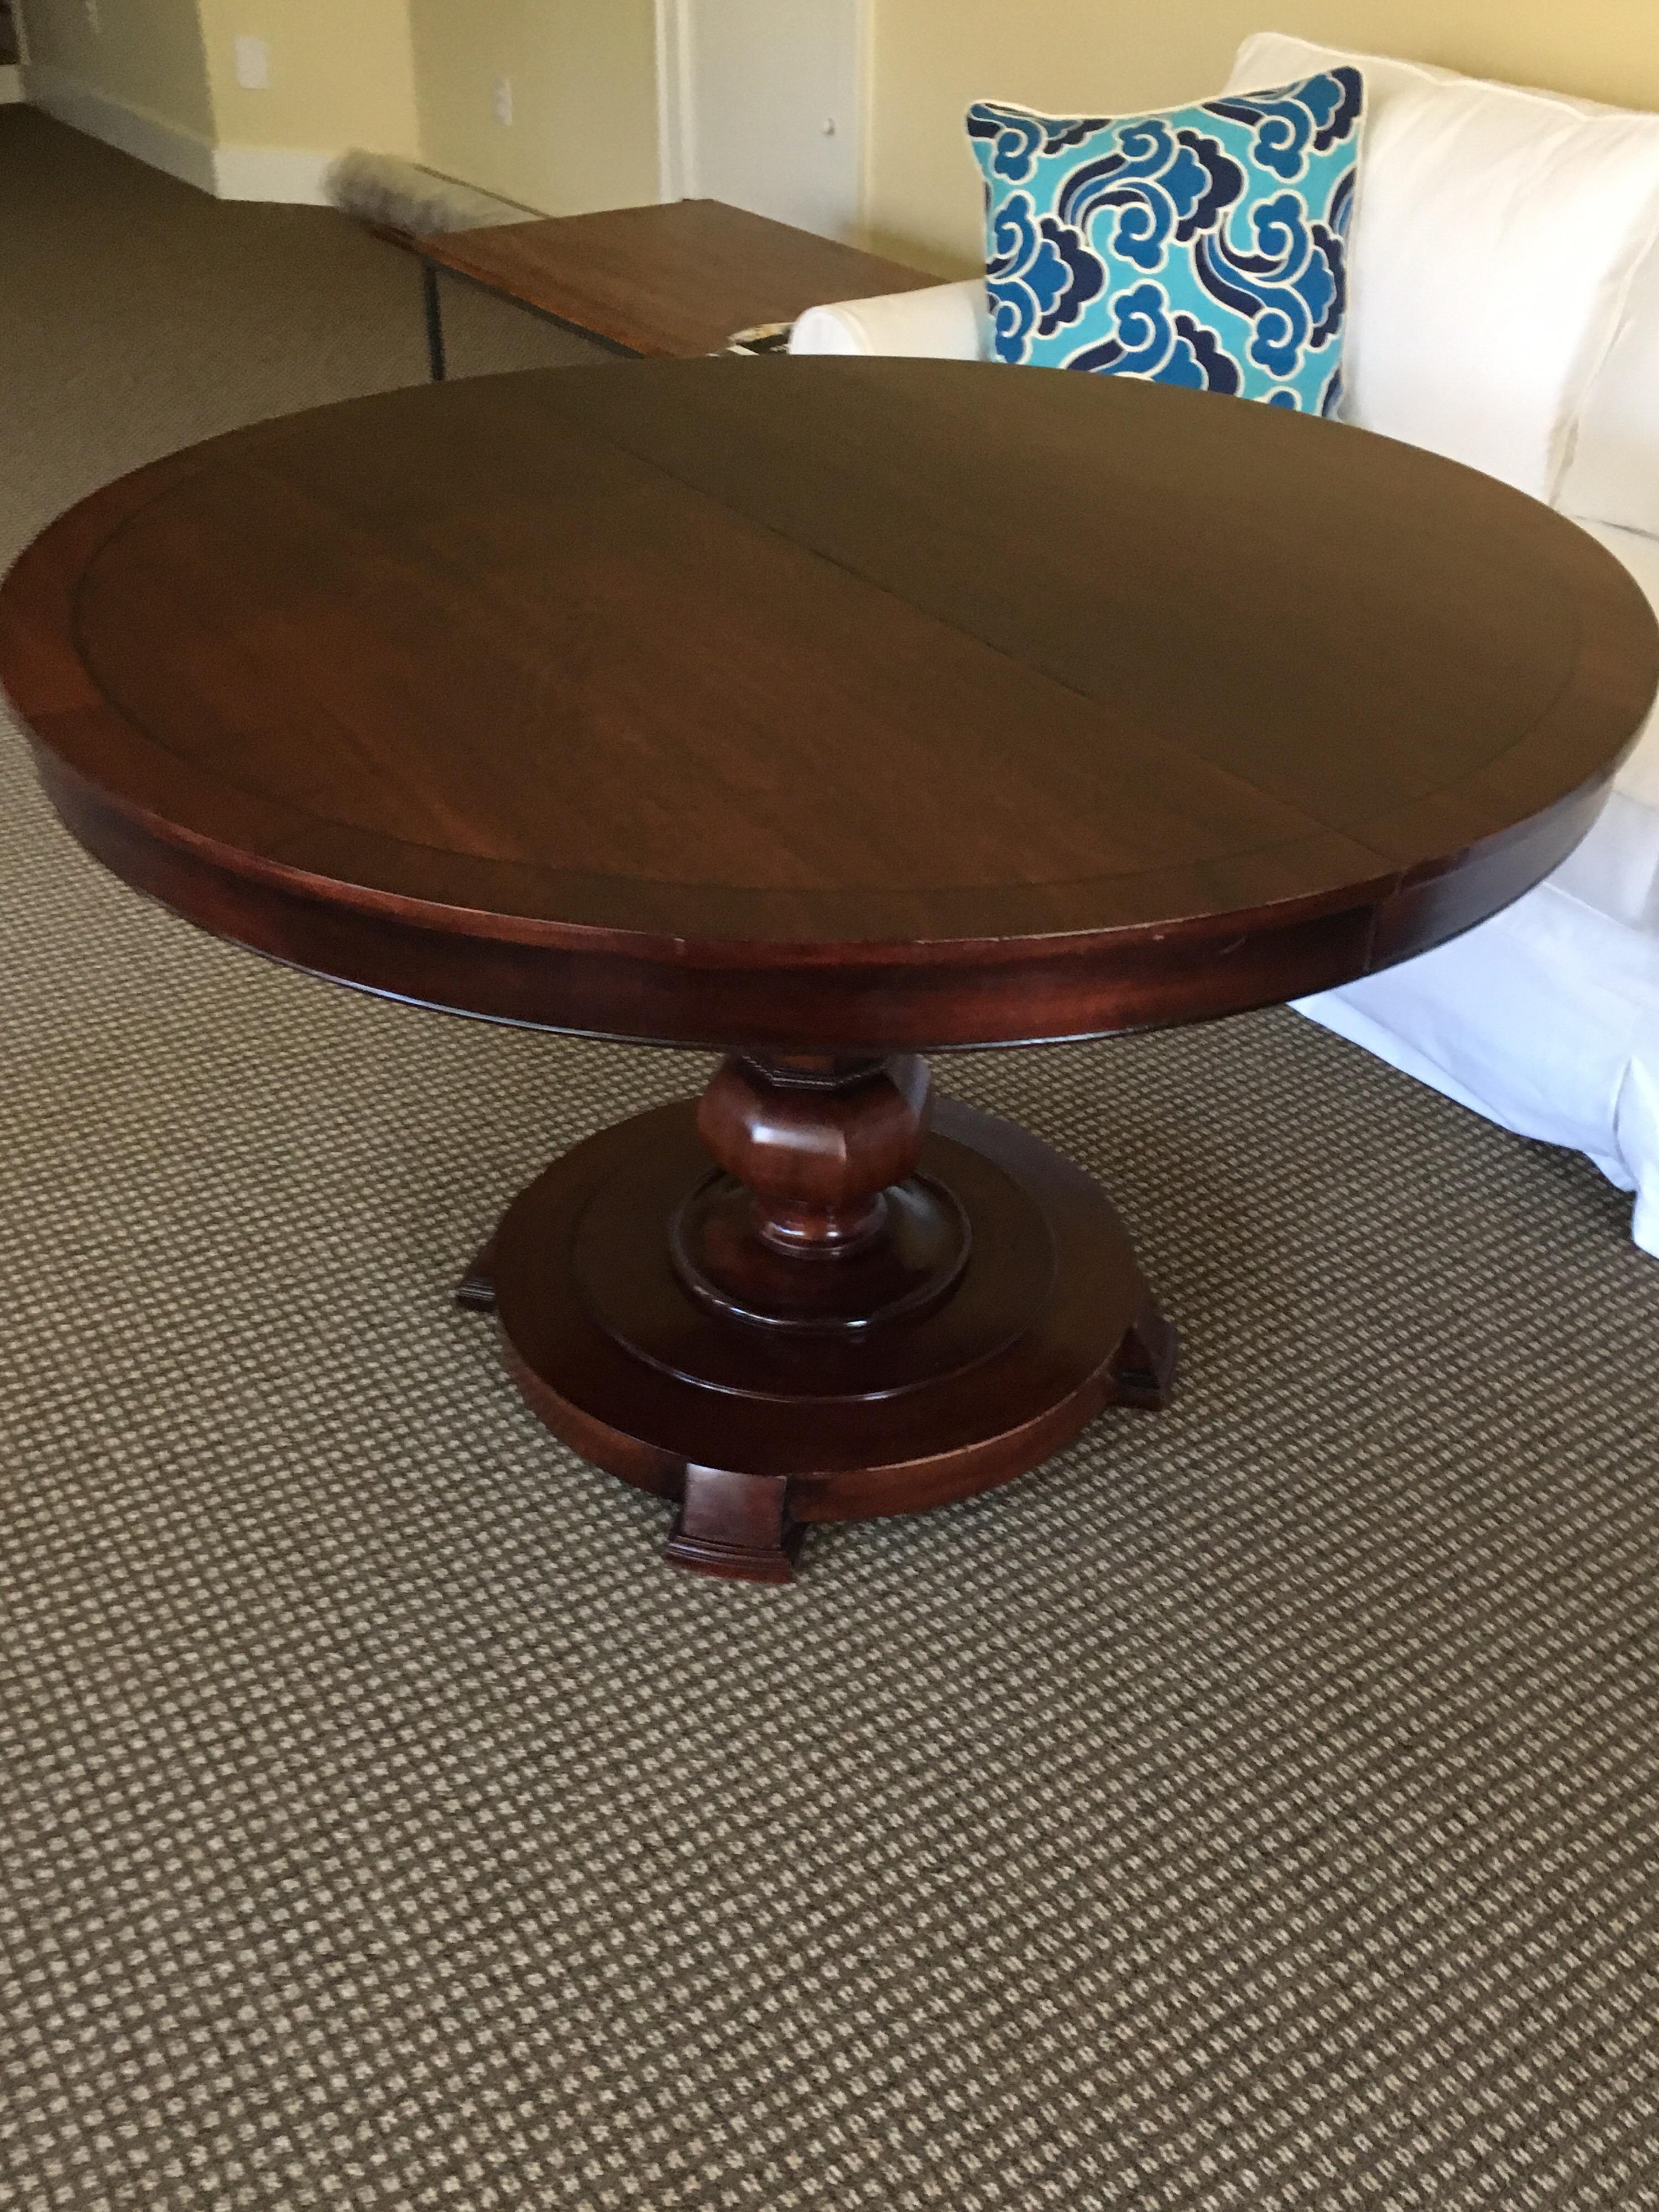 Round Rosewood Pedestal Center or Dining Table, 1950s by Maitland Ward For Sale 7